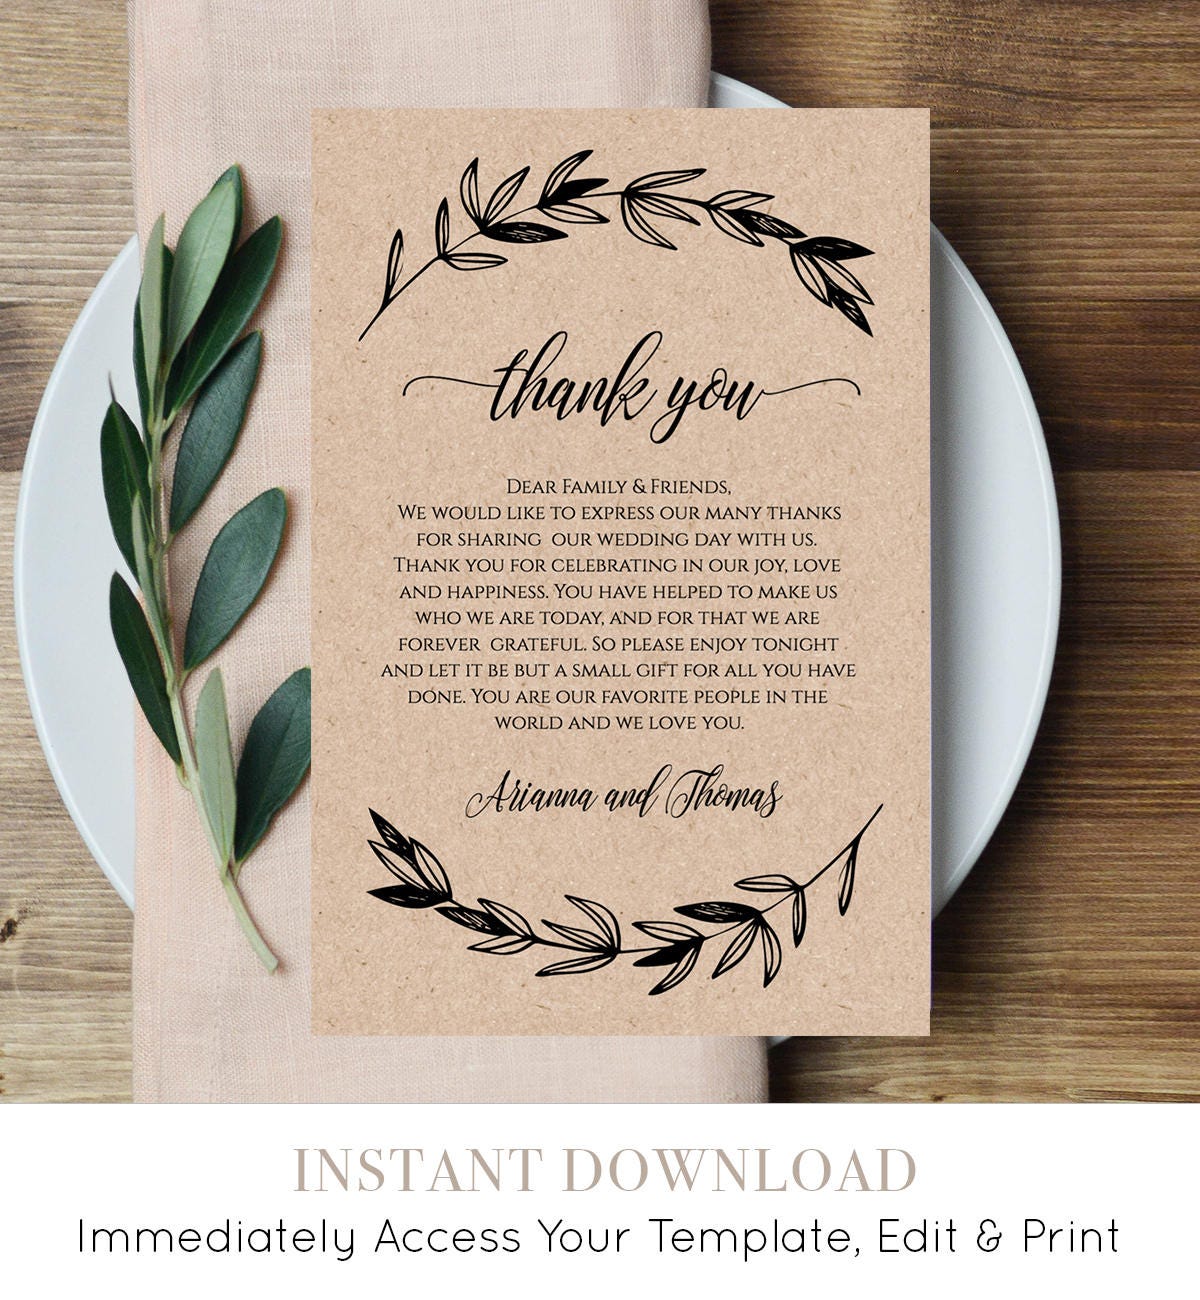 printable-wedding-thank-you-letter-reception-thank-you-note-in-lieu-of-favor-card-100